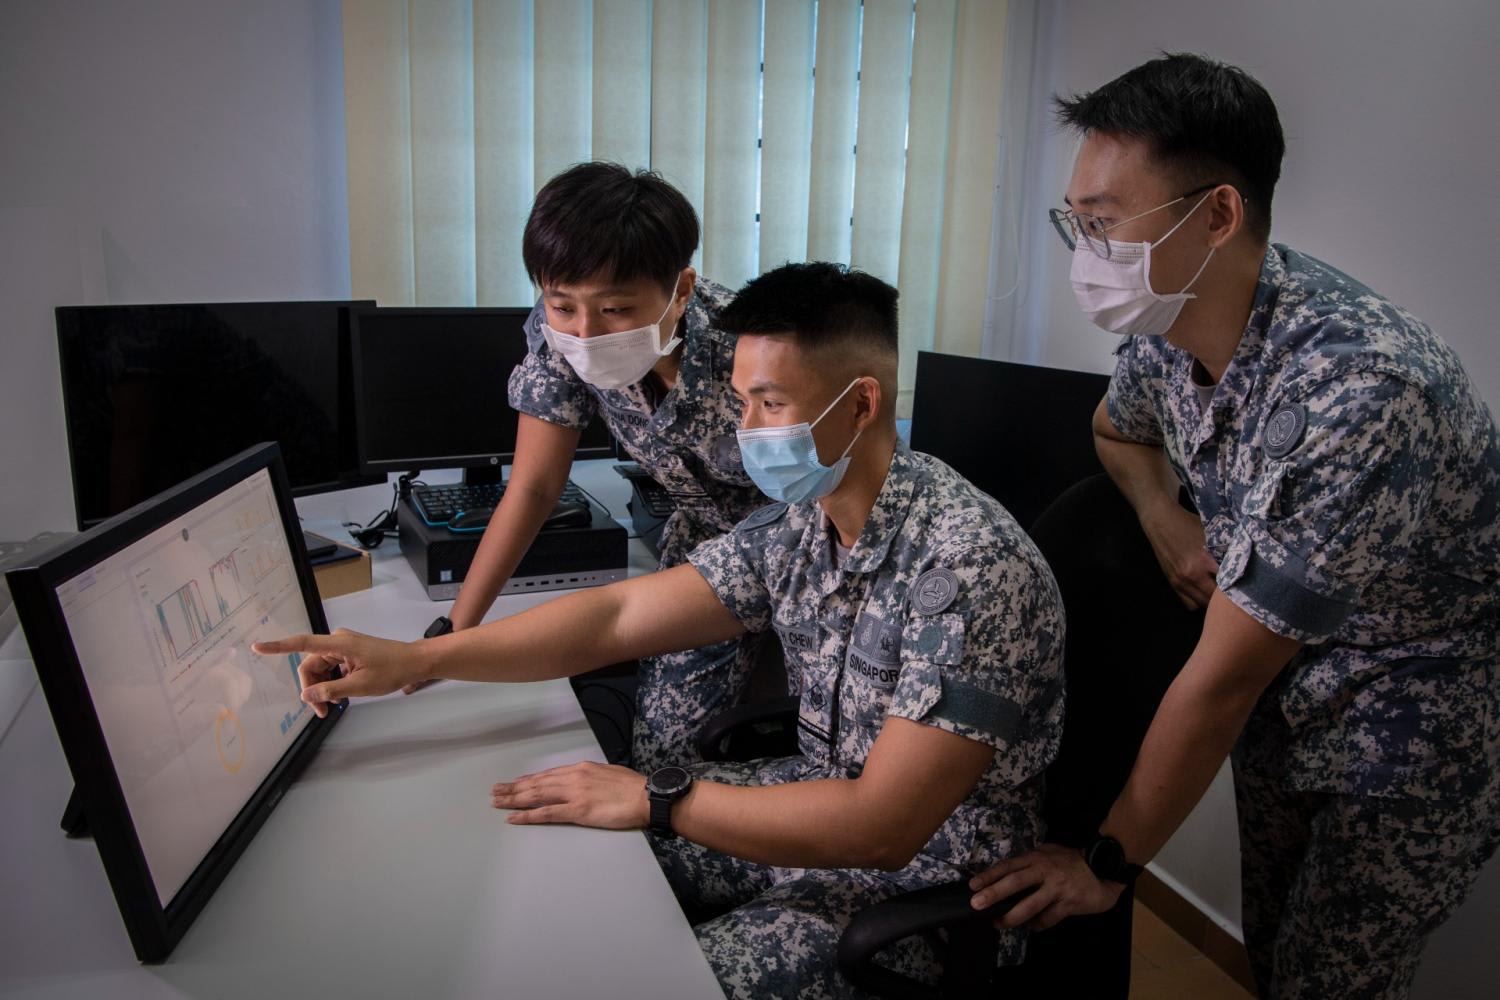 Military personnel analysing sound readings from a sensor as part of predictive maintenance for the Navy's vessels.